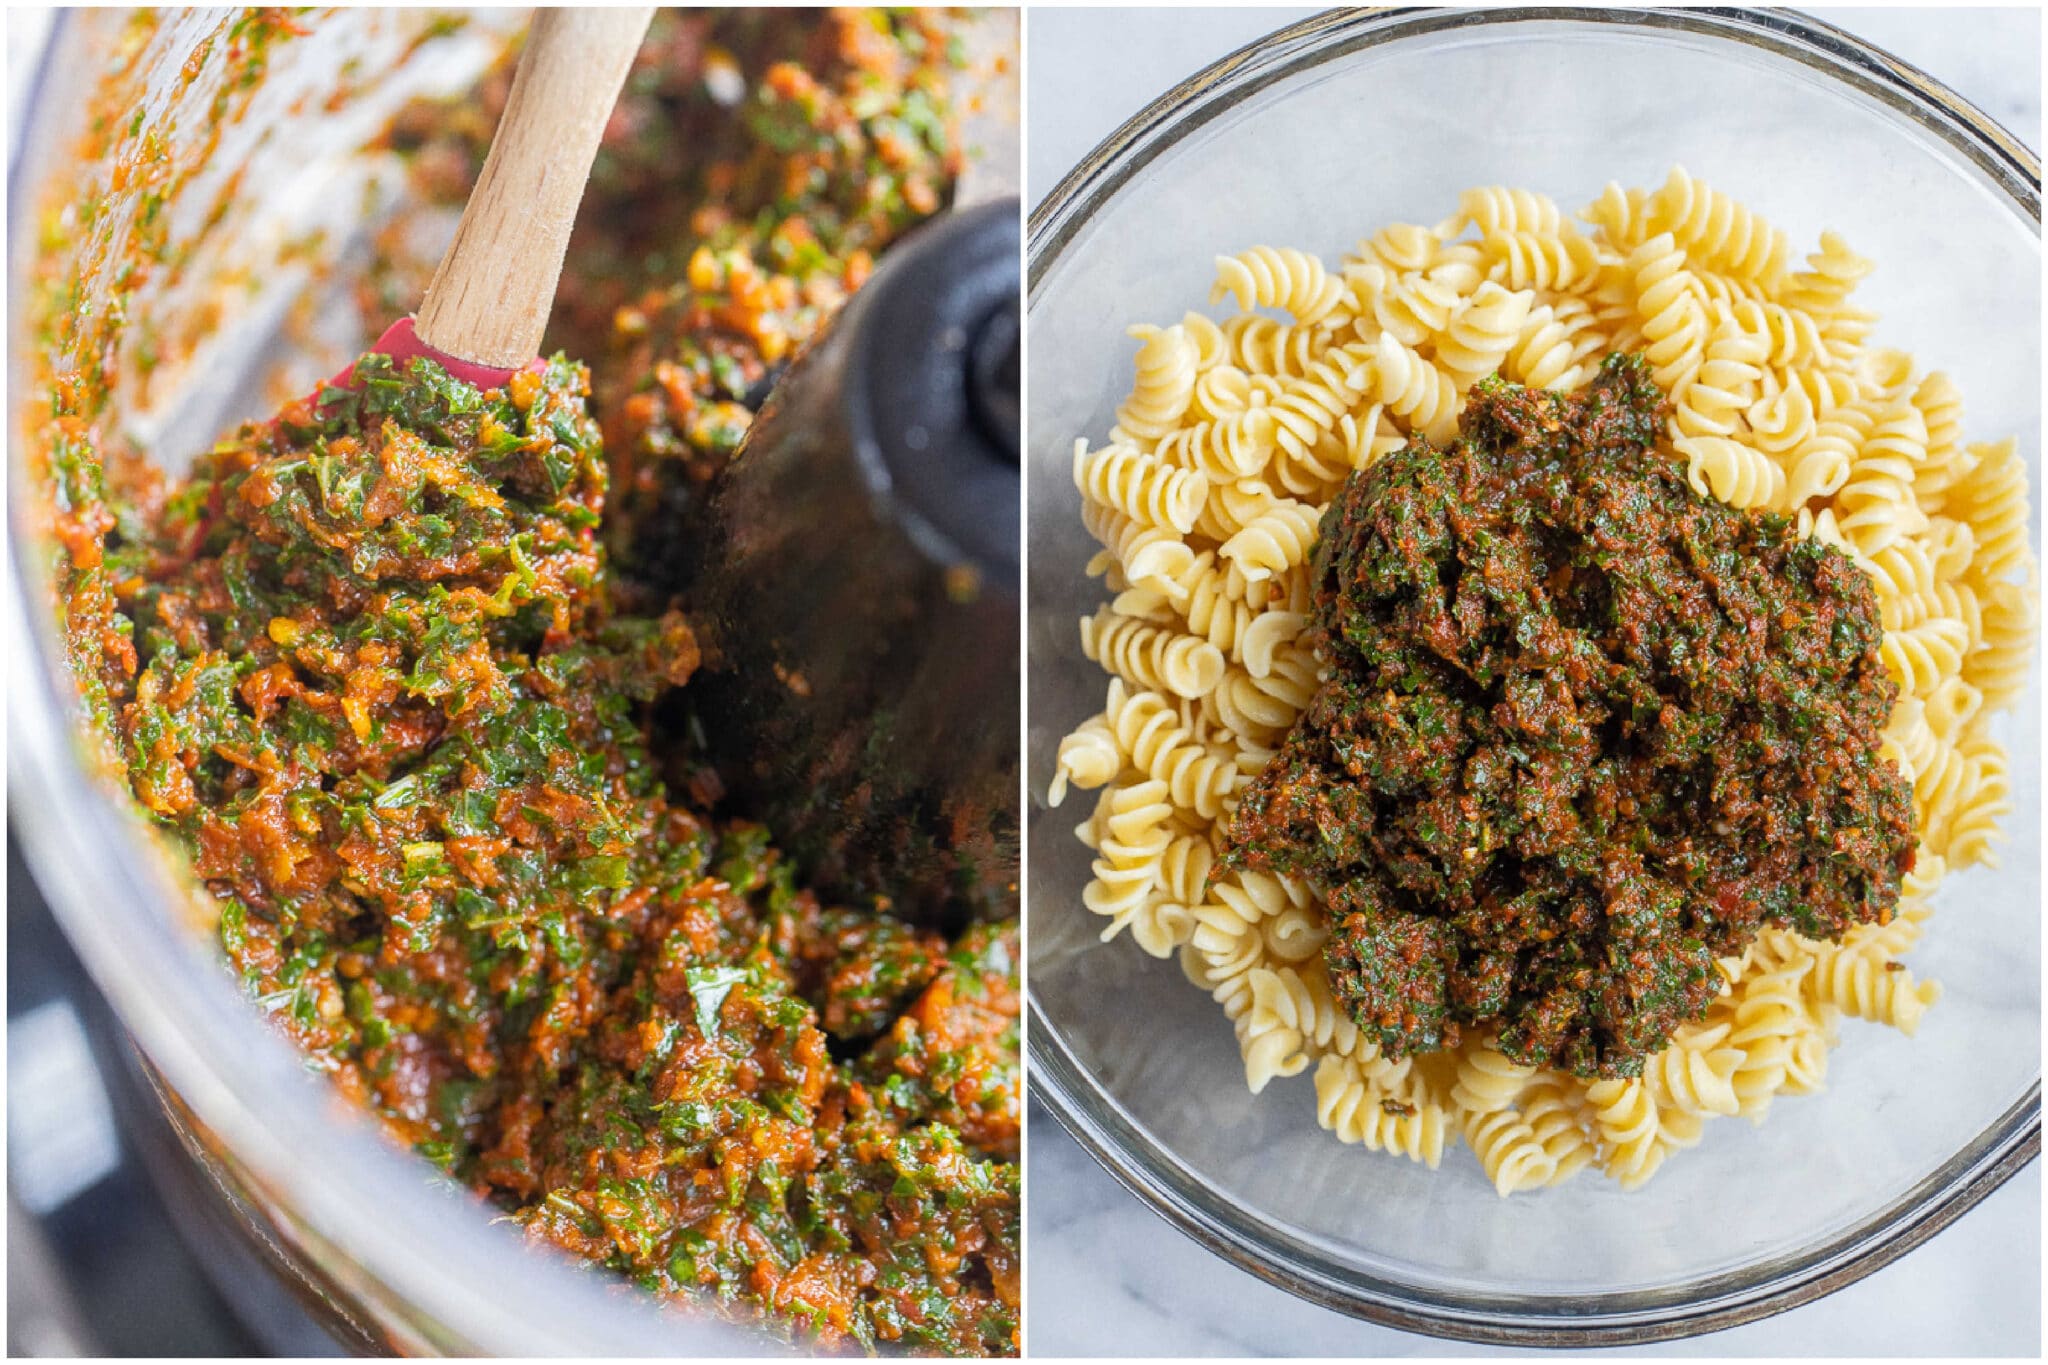 sun-dried tomato pesto in the food processor and then being mixed into the rotini pasta